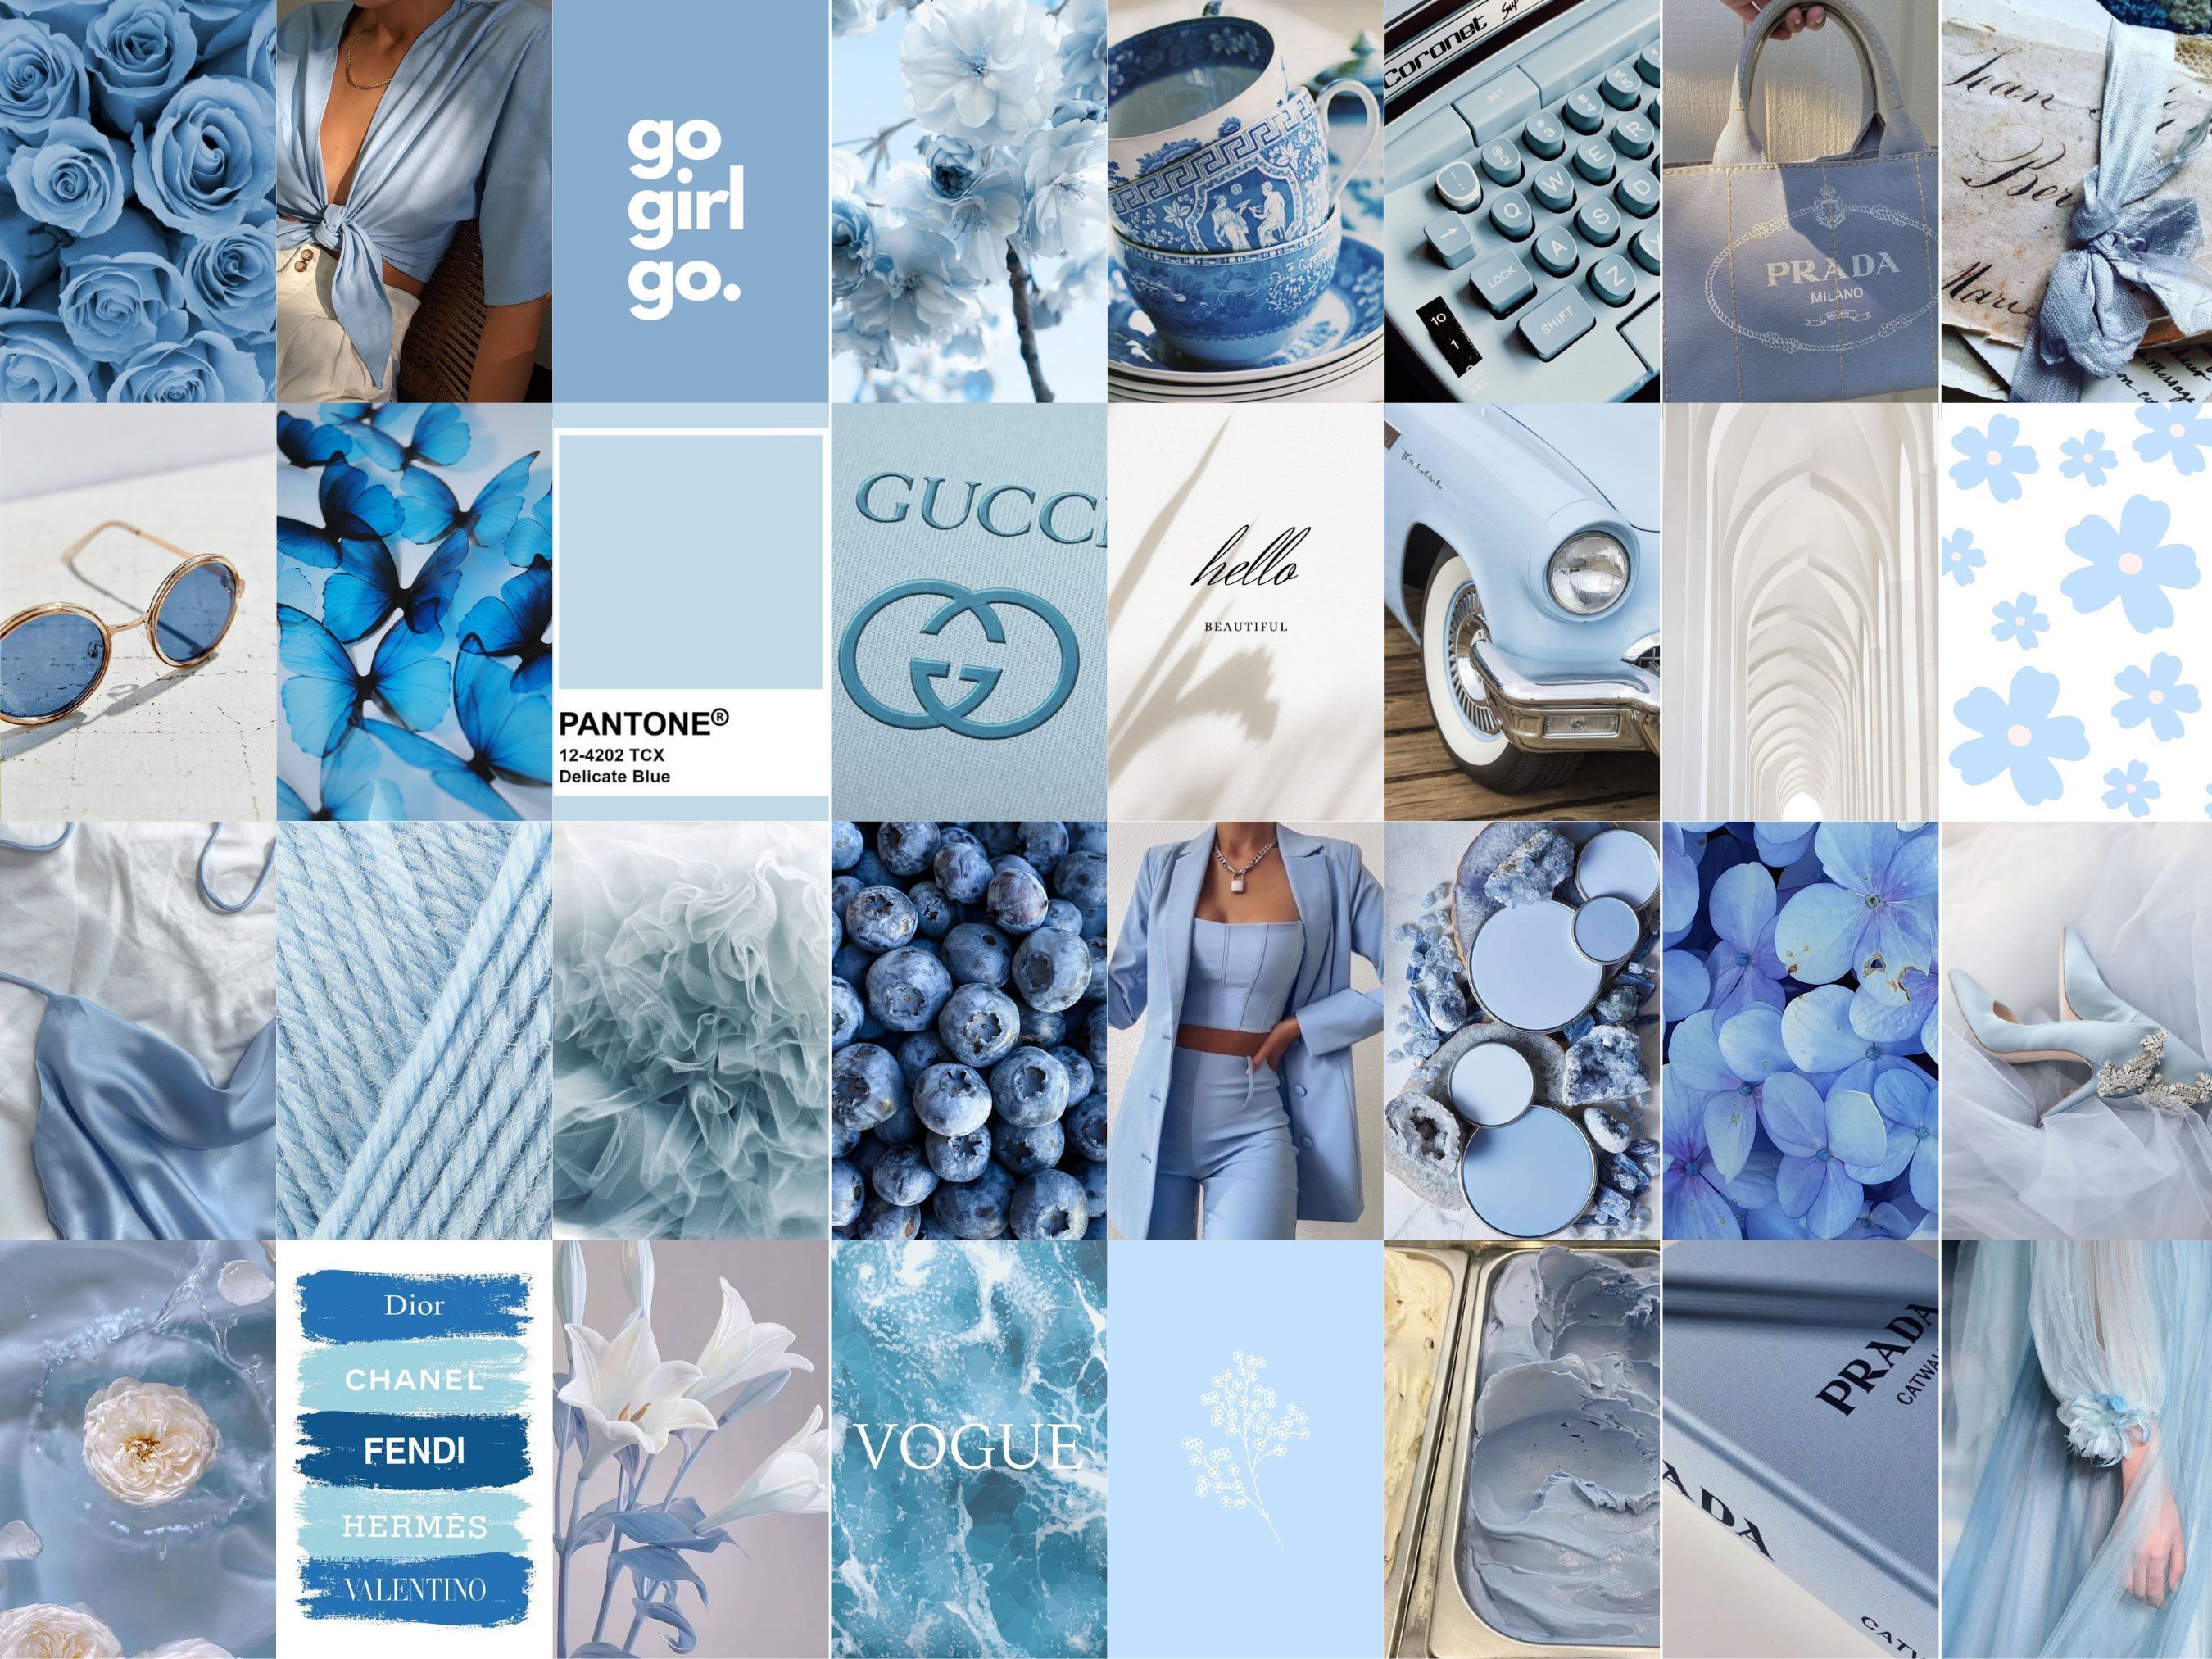 A collage of blue images, including butterflies, vases, and other aesthetic images. - Pastel blue, blue